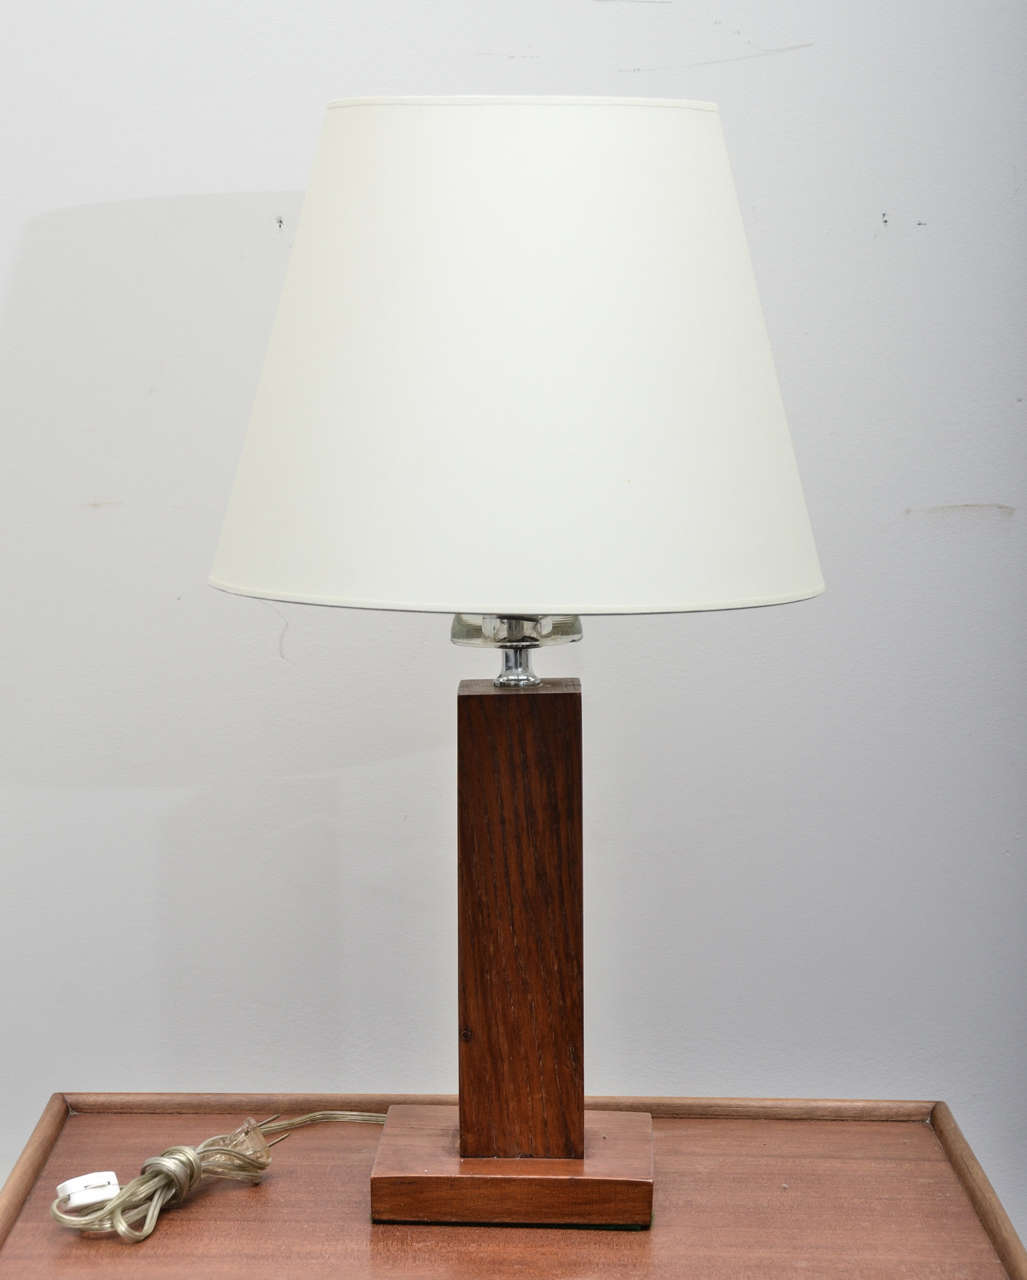 Pair of square oak table lamps with polished nickel fittings and 